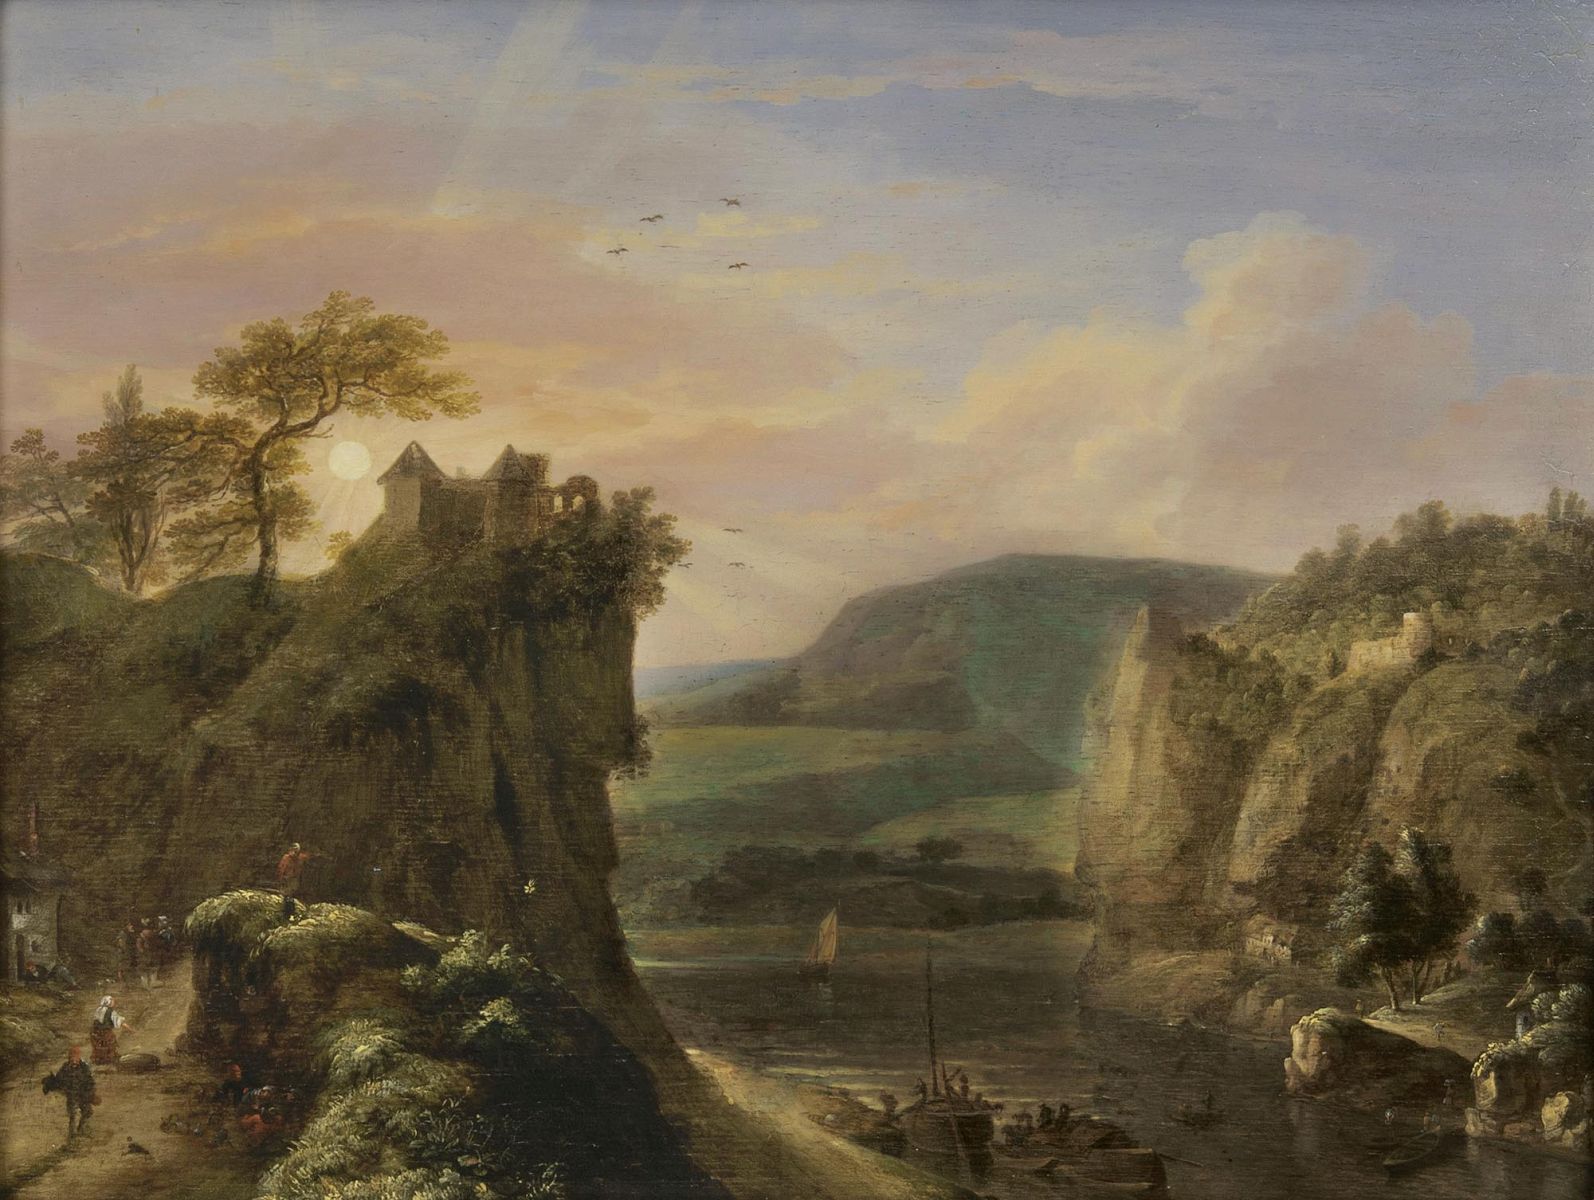 Extensive Landscape with Sunset